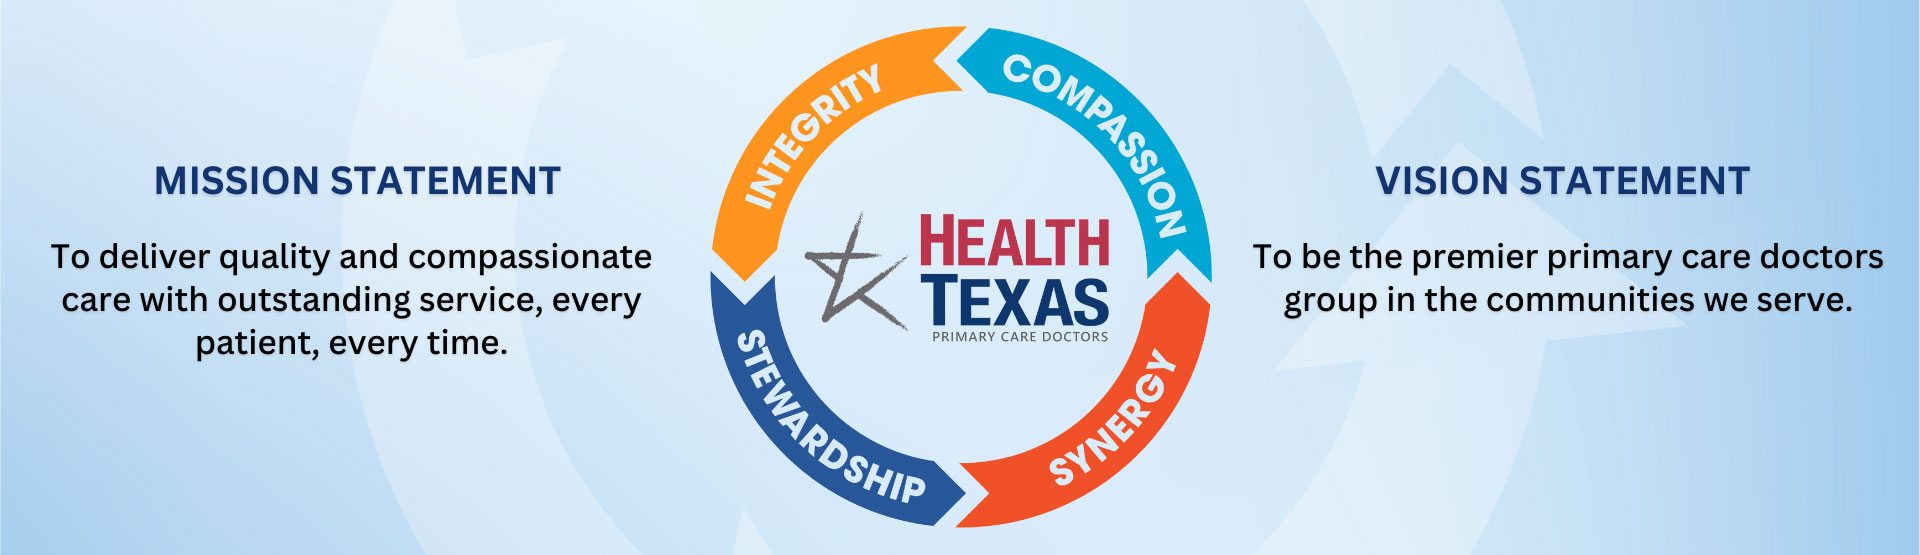 HealthTexas Missions